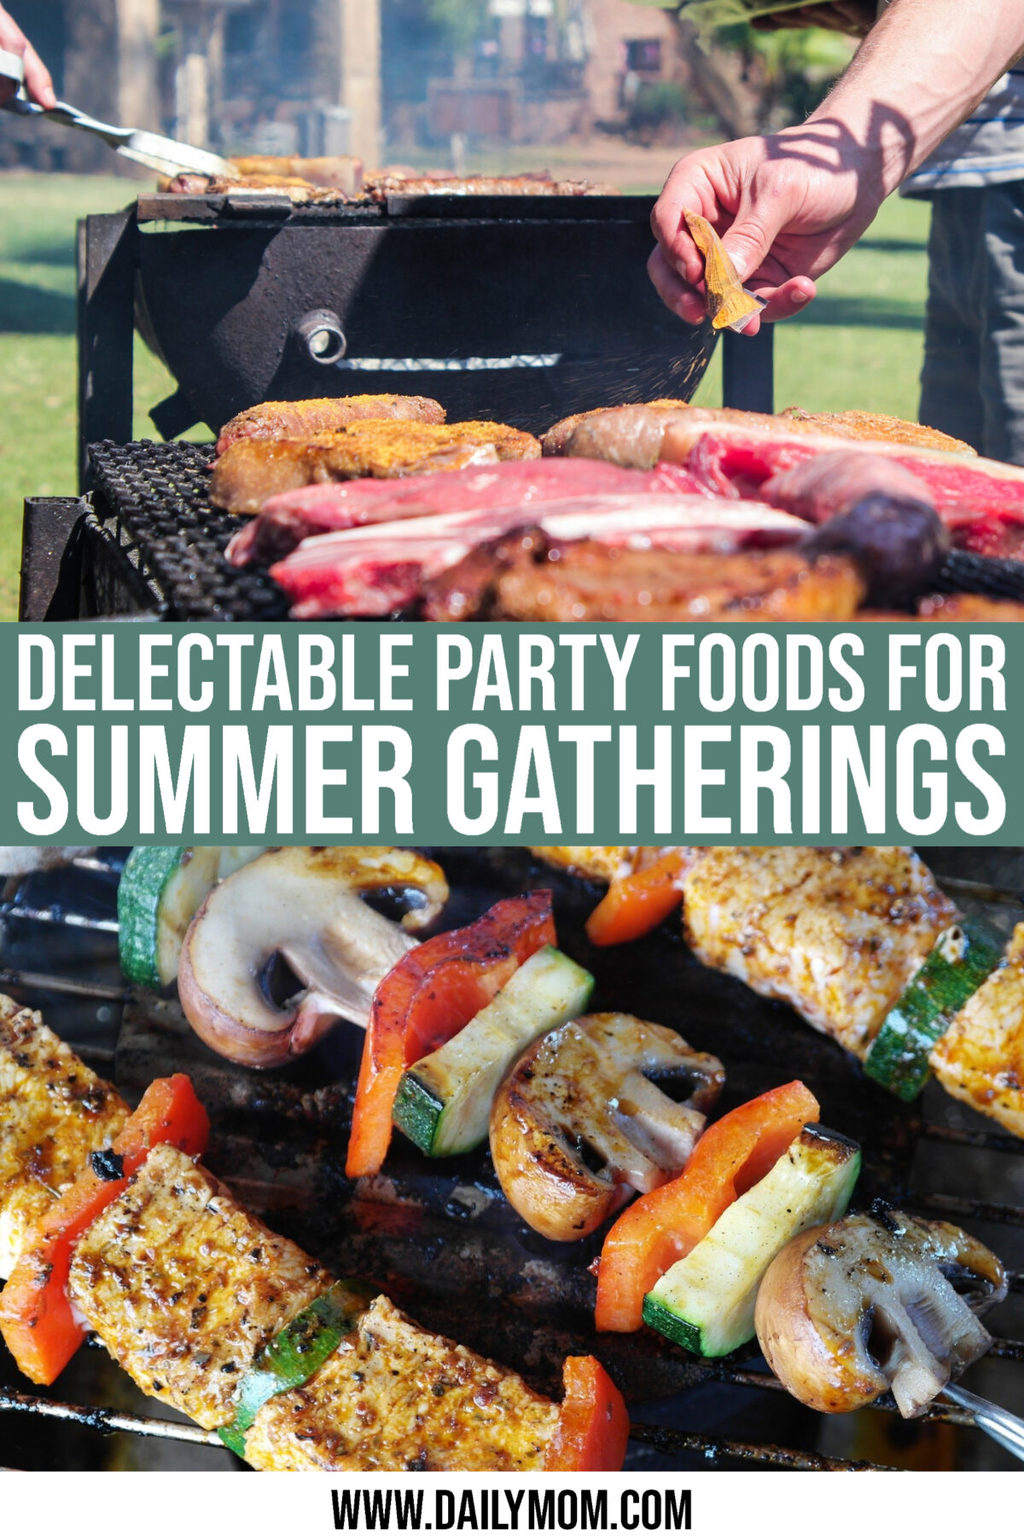 18 Things You Need To Create Mouth-Watering Summer Party Food (And Delectable Memories!)